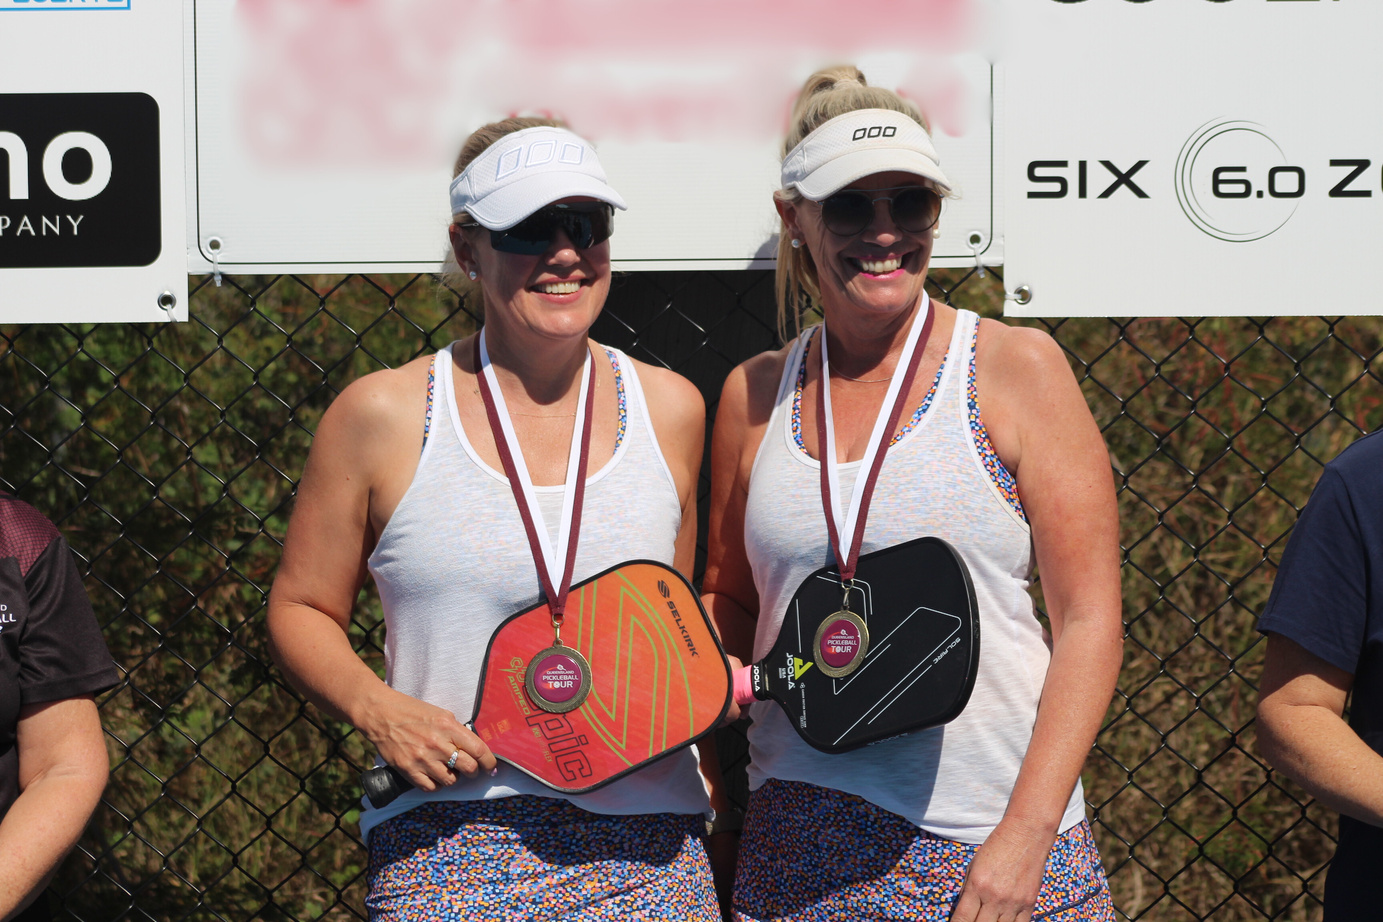 The Yeppoon Pickleball Festival is the best way to experience the Queensland Pickleball Tour - you can't beat Central Queensland in July! 